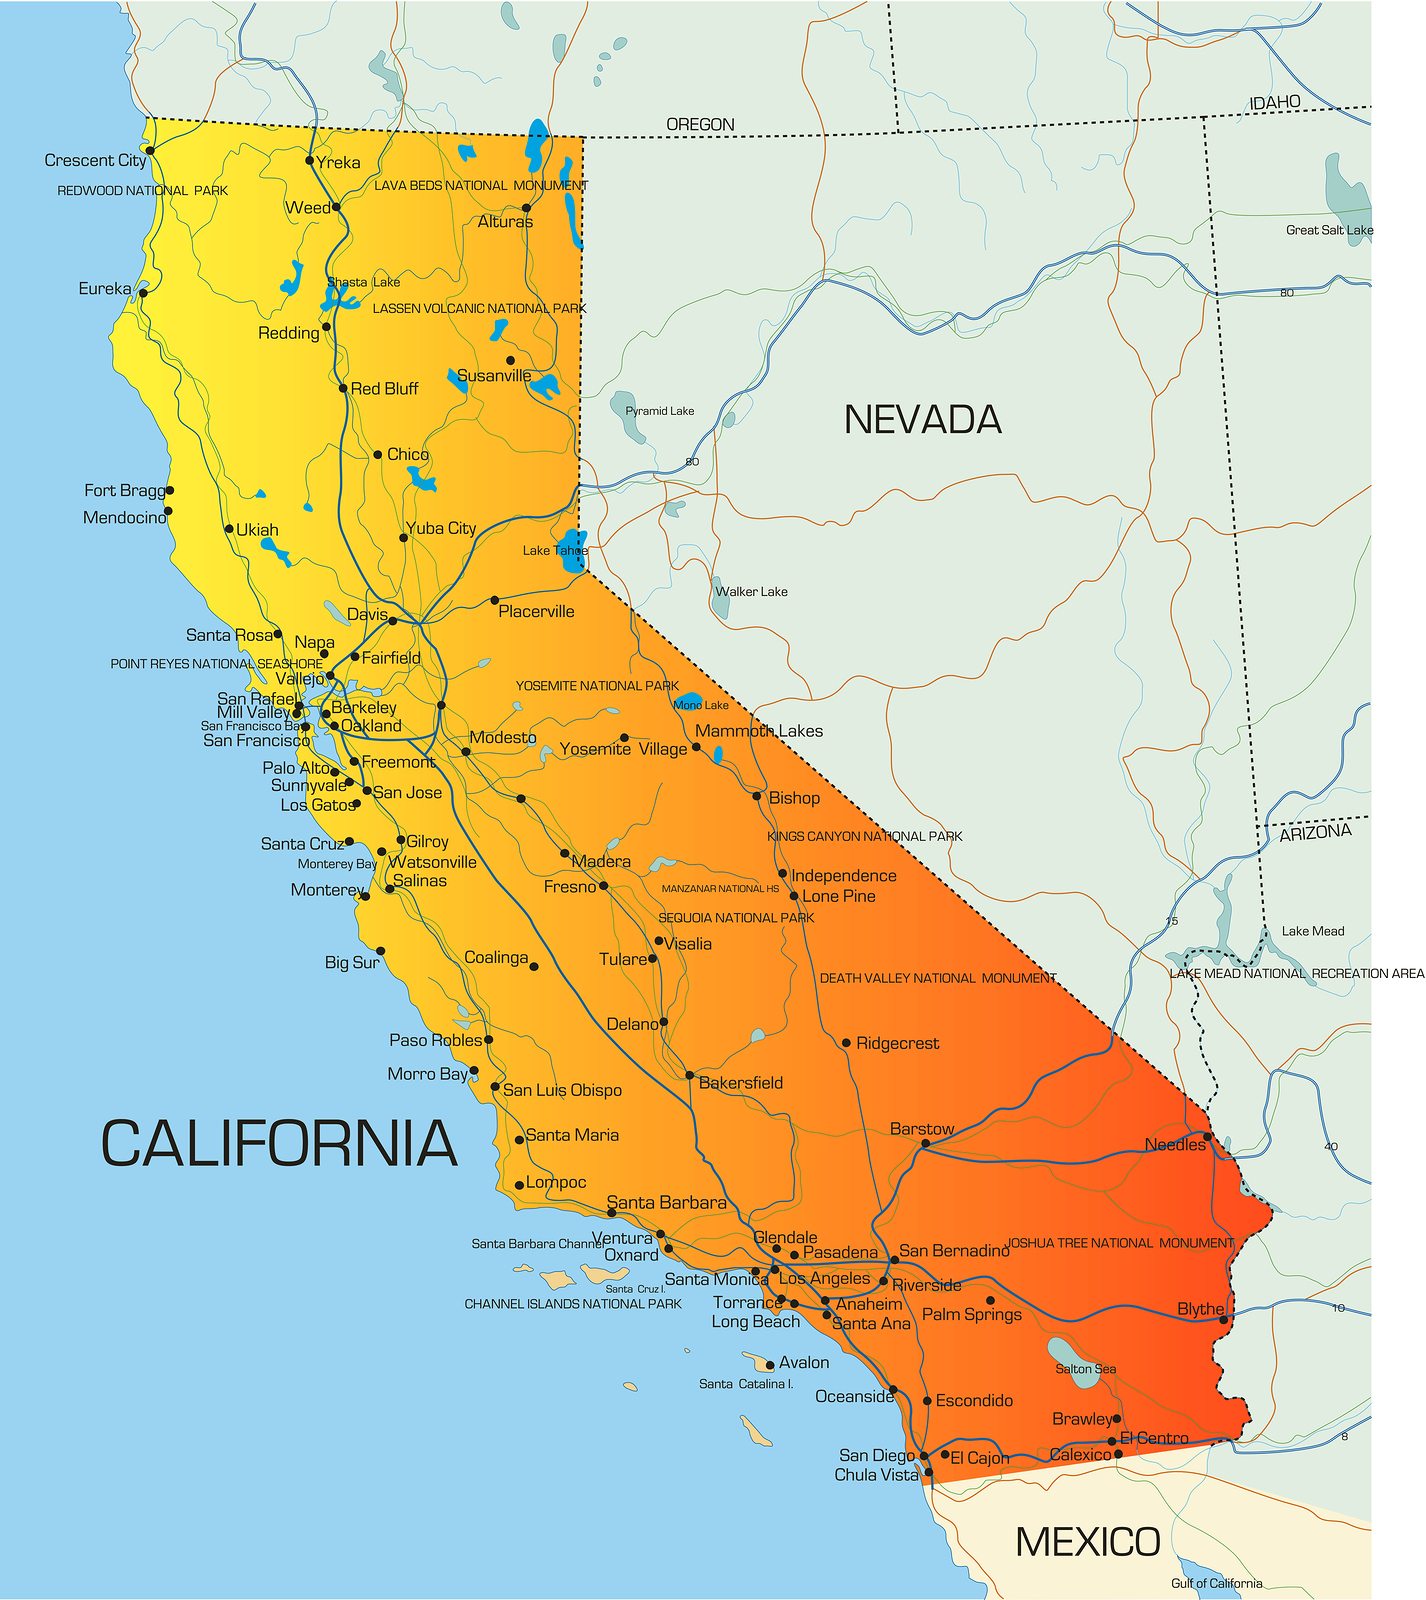 California LVN Requirements and Training Programs